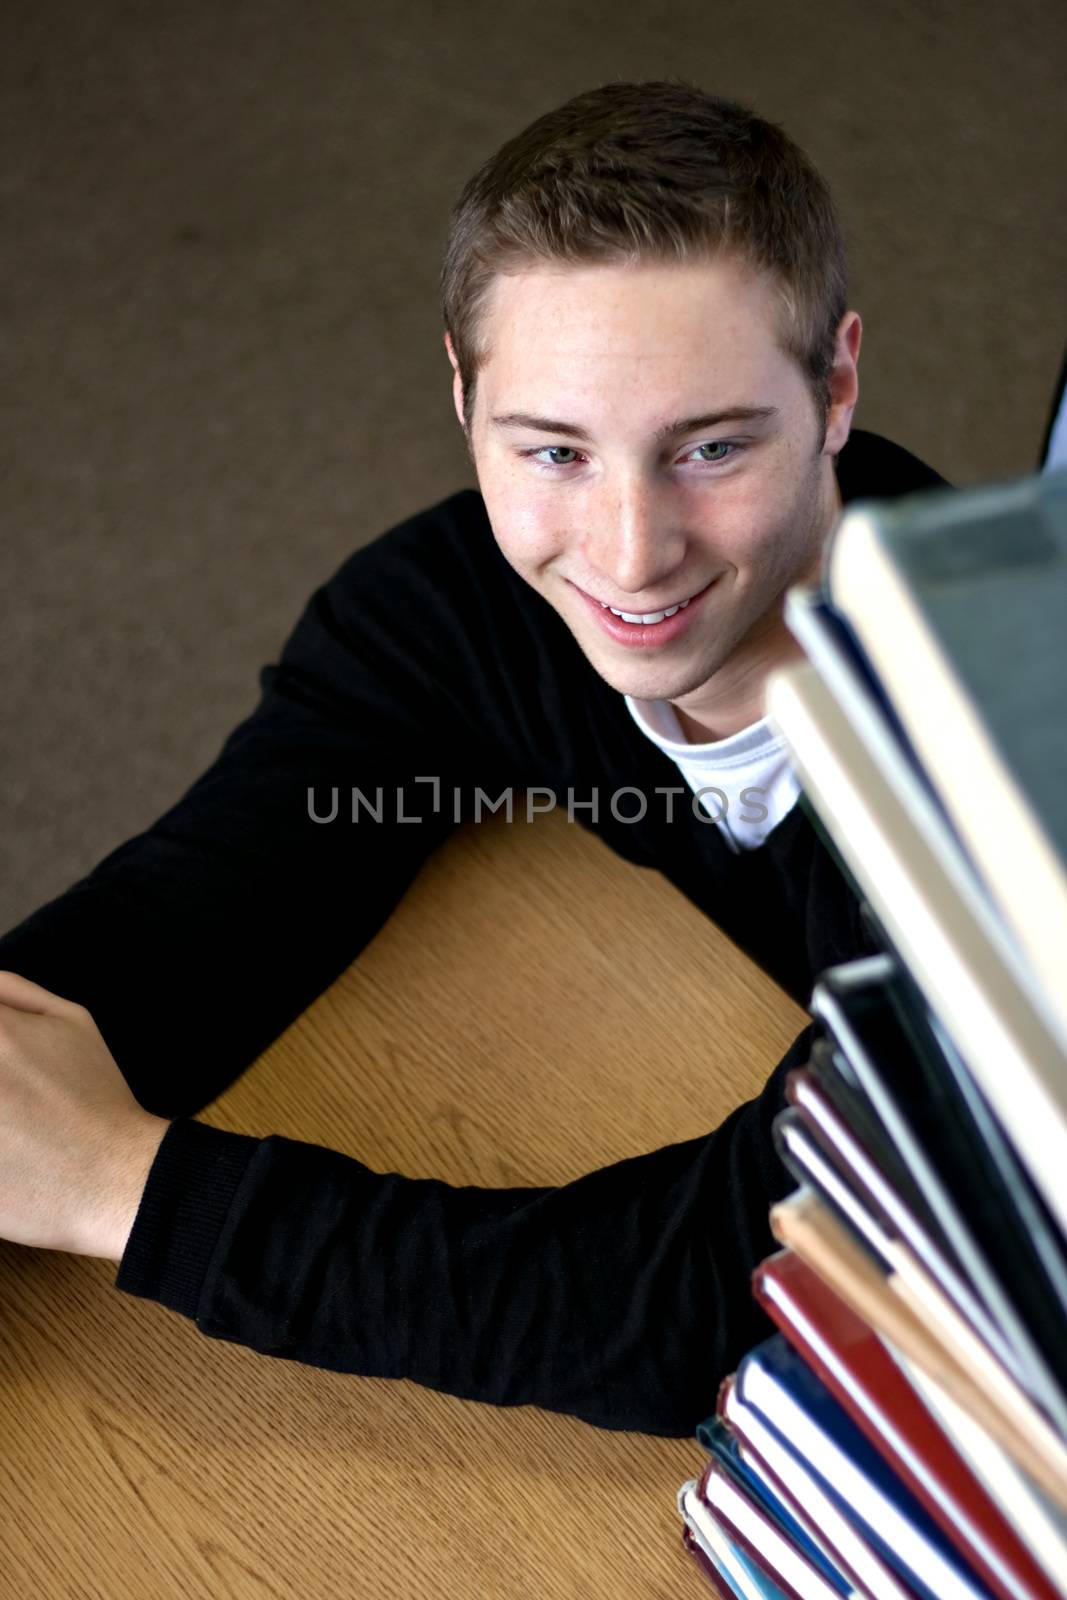 A student happily looks up at the high pile of textbooks he has to go through to do his homework assignment.